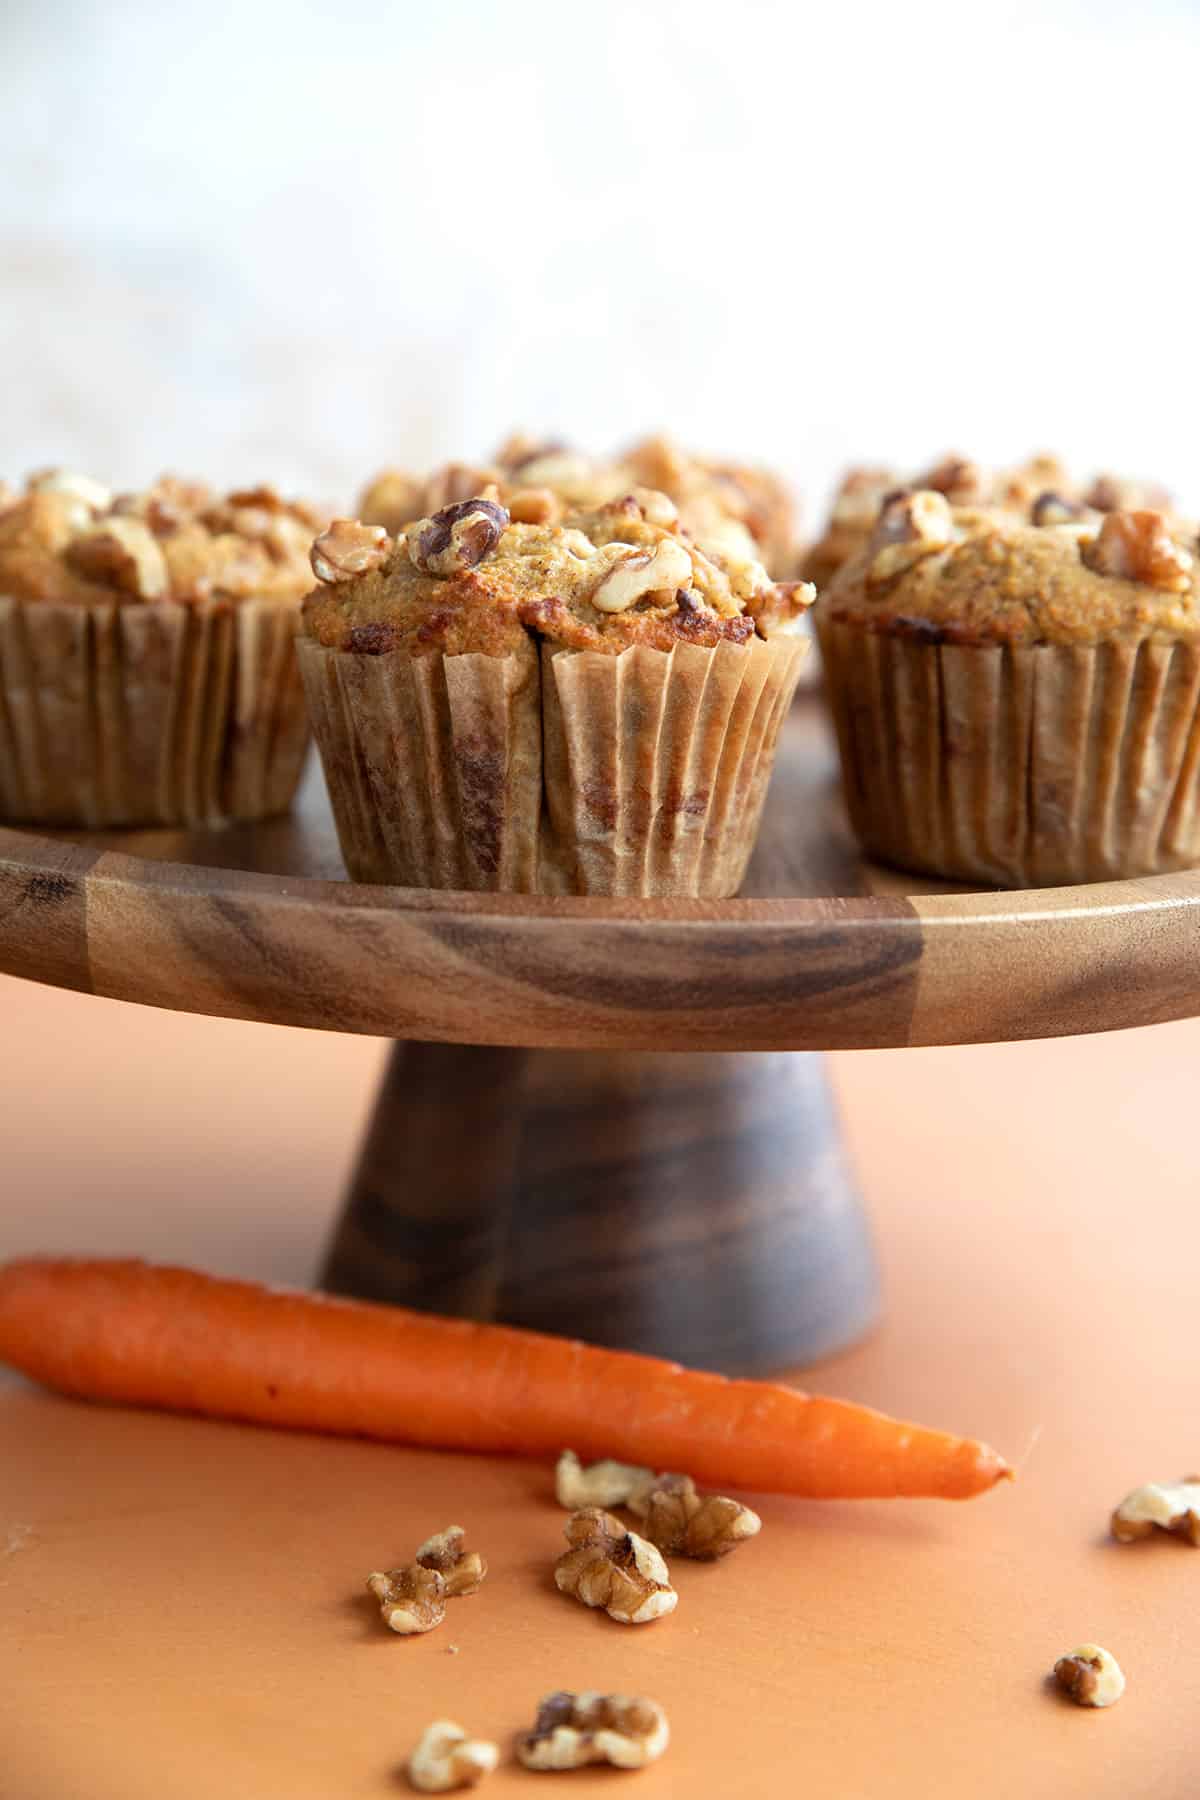 A wooden cake stand filled with freshly baked Keto Carrot Cake Muffins.